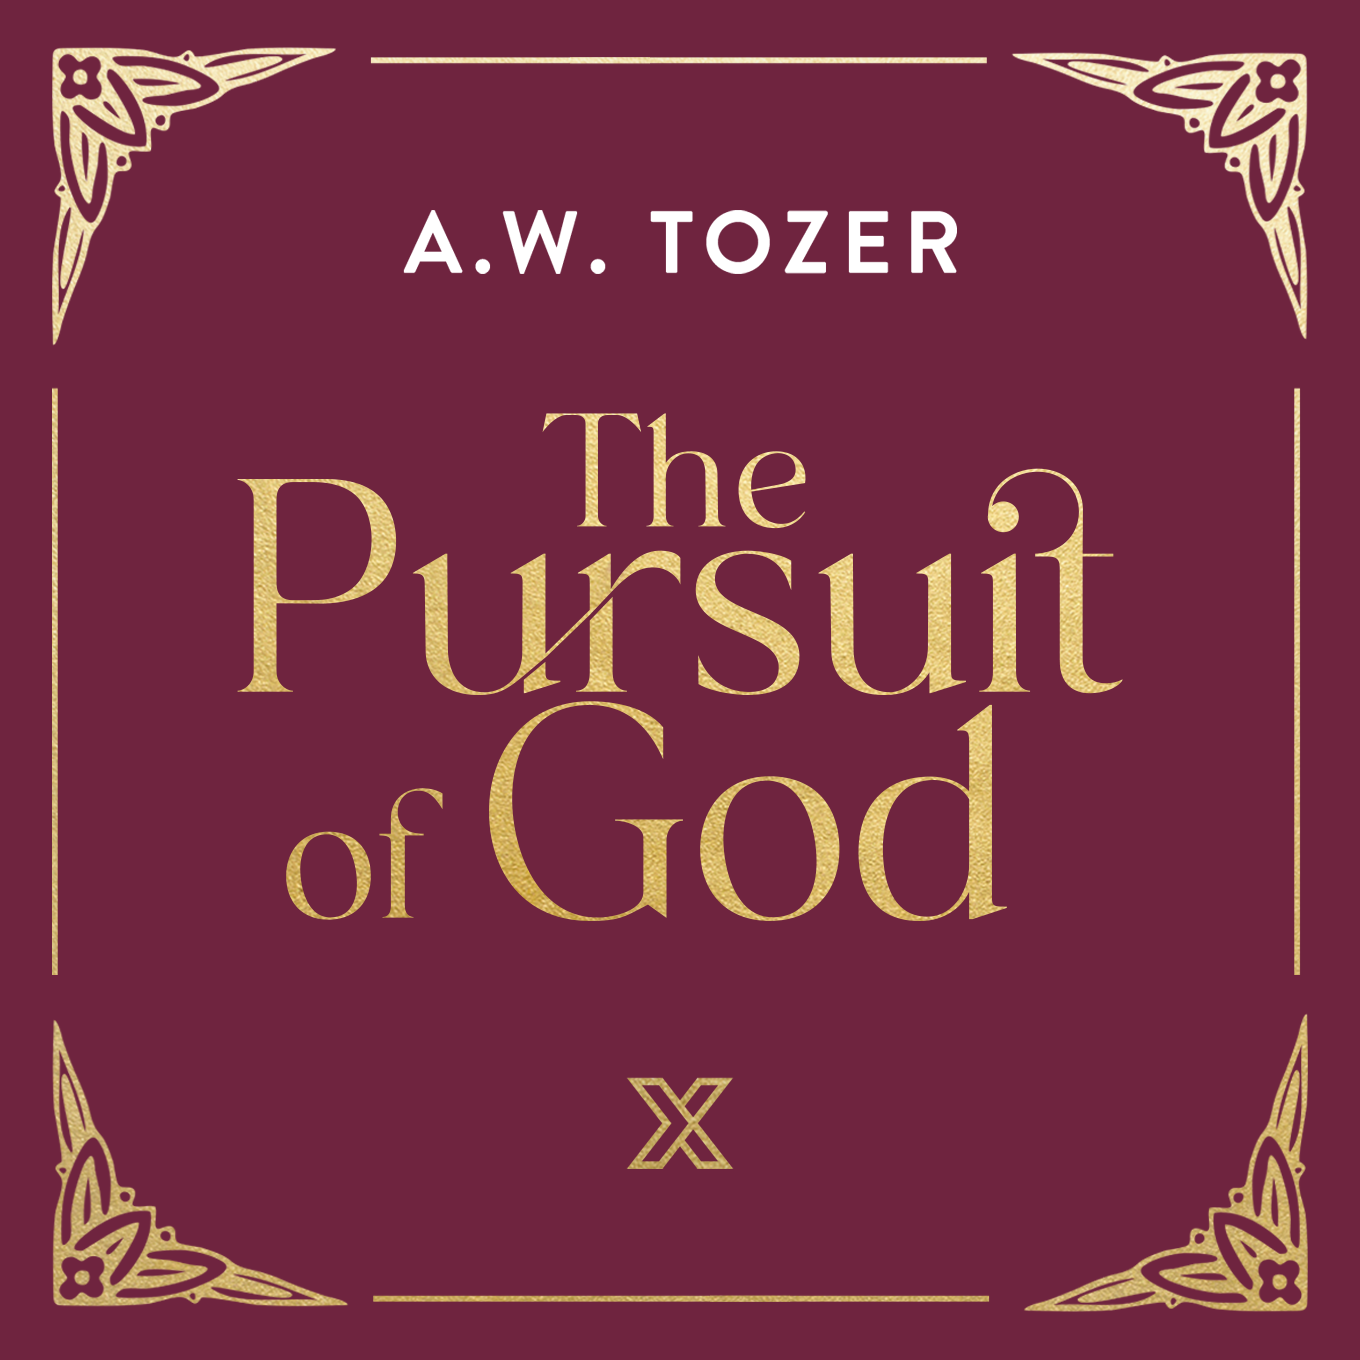 The Pursuit of God Audiobook